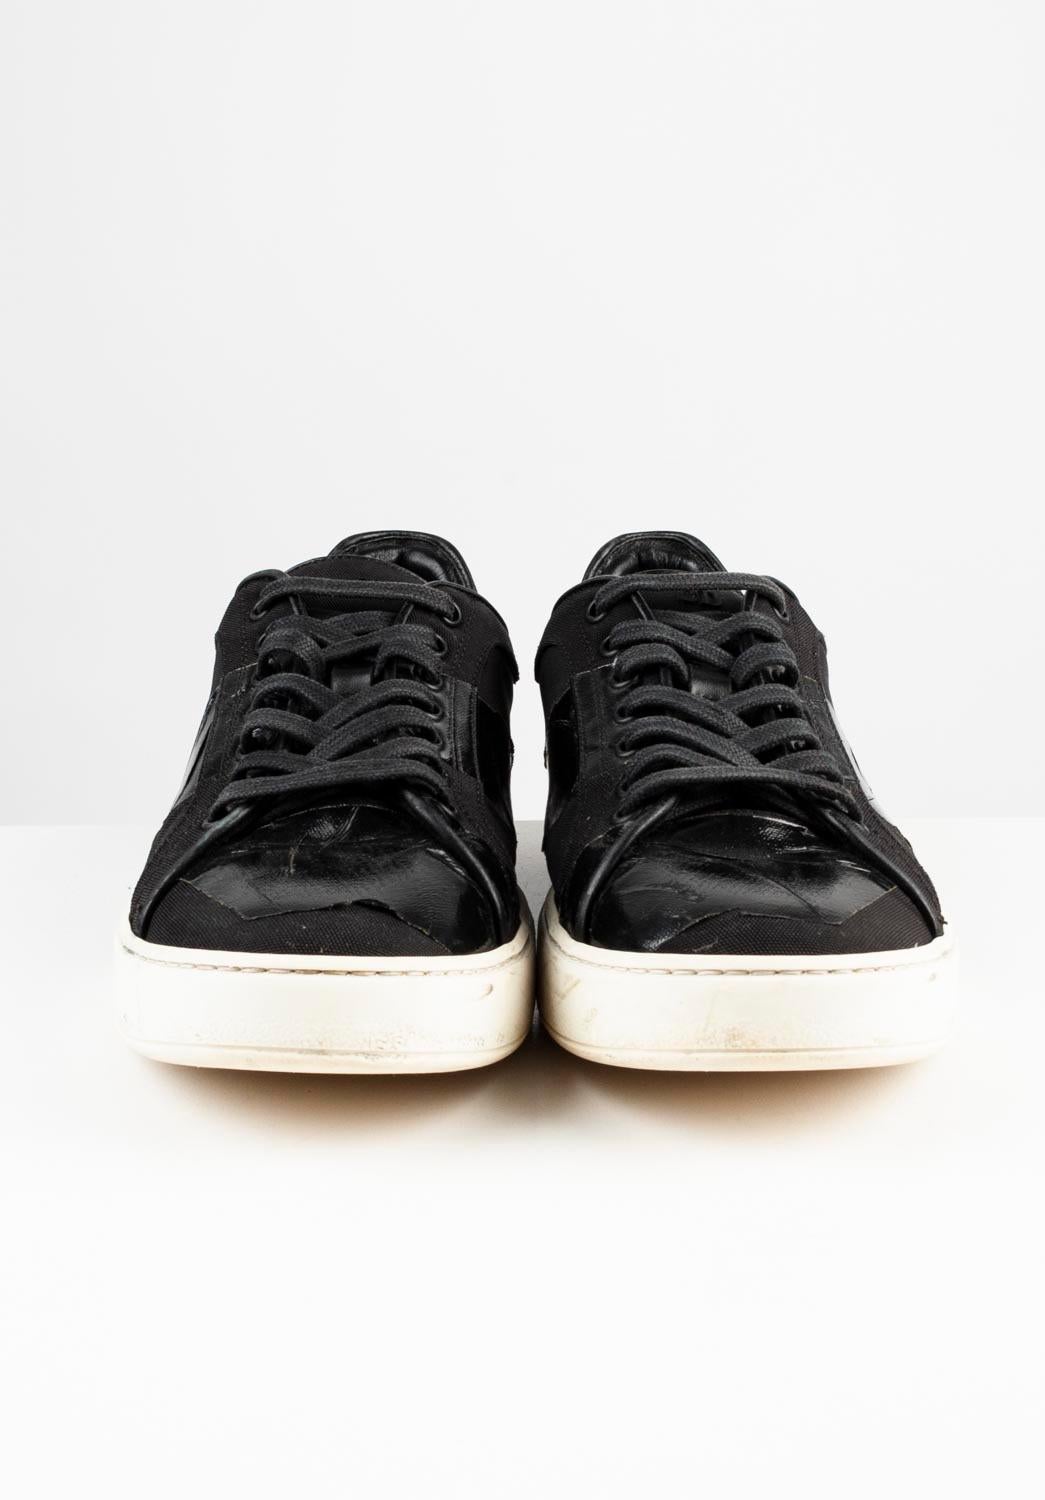 100% genuine Dior Homme AW17 sneakers, S694 
Color: black
(An actual color may a bit vary due to individual computer screen interpretation)
Tag size: EUR41, USA 7 ½, UK 6 1/2
These shoes are great quality item. Rate 9 of 10, excellent used